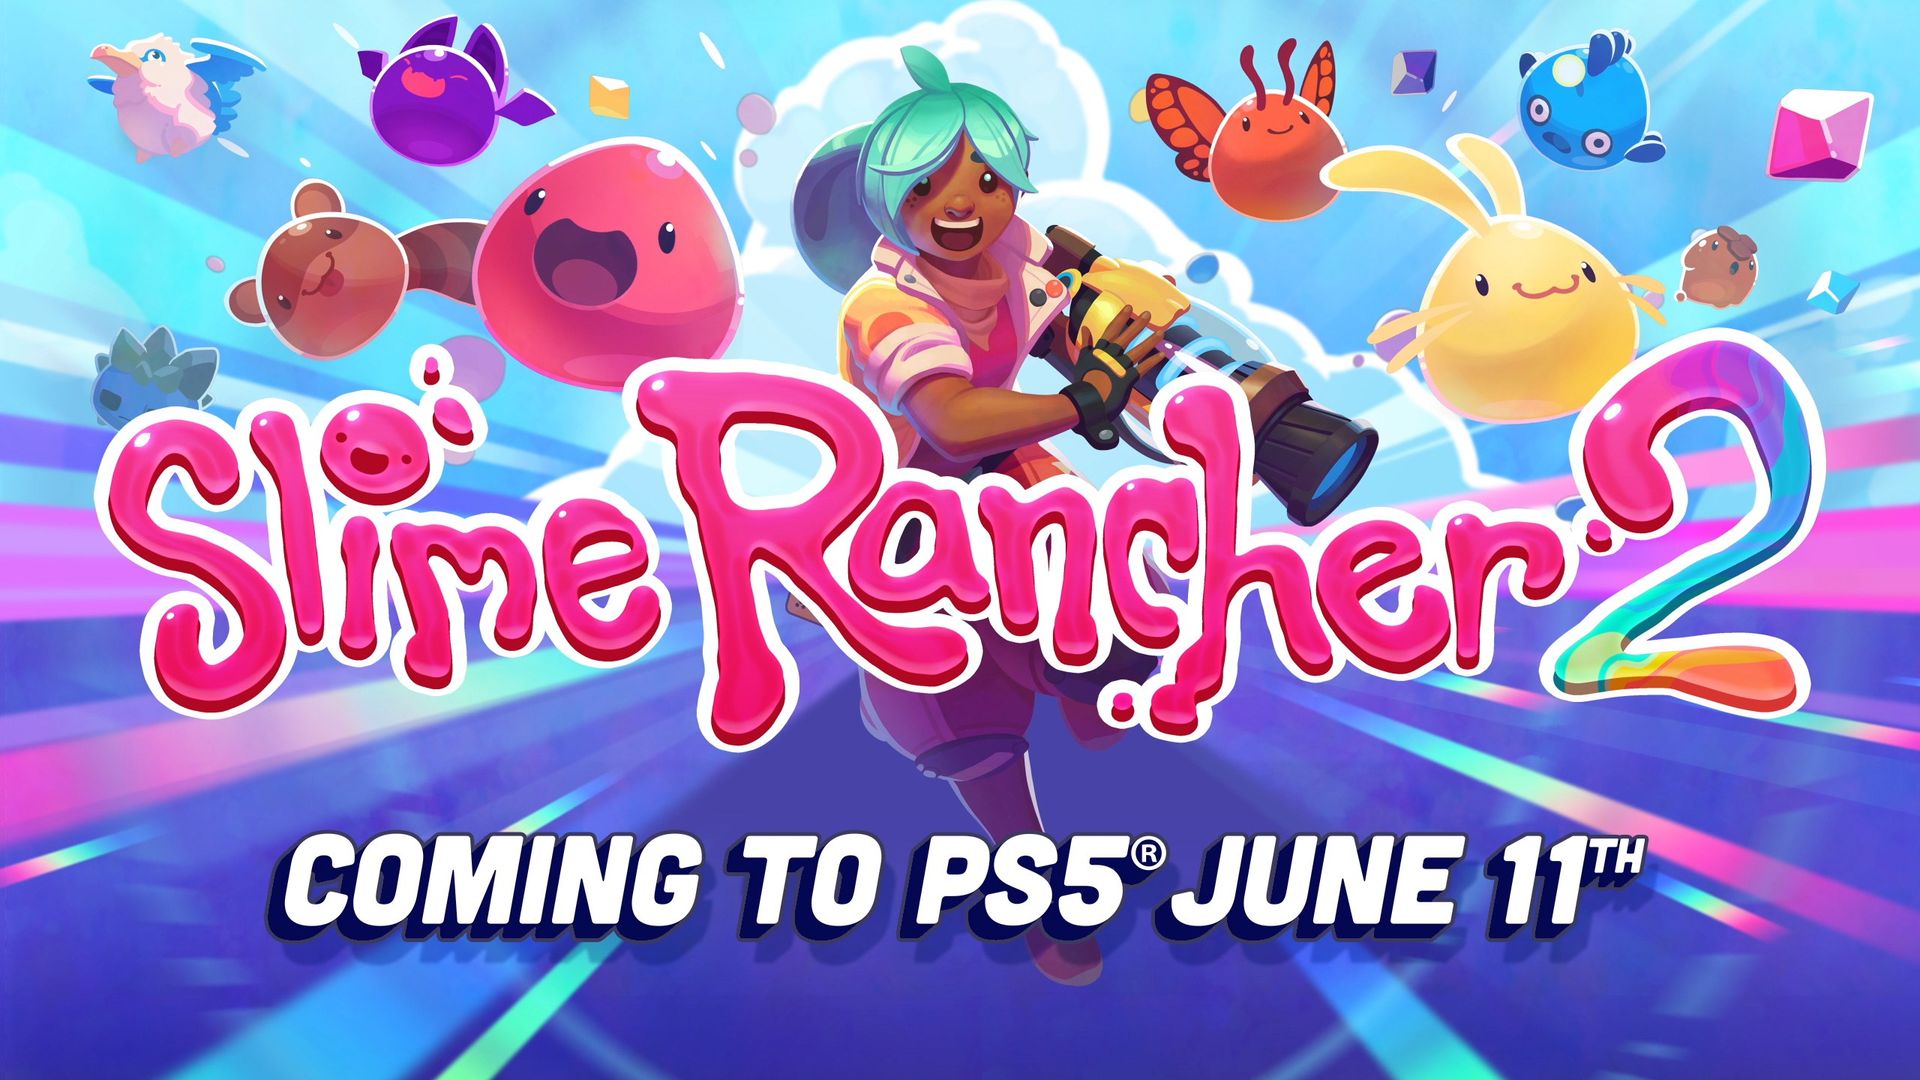 Slime Rancher 2 bouncing onto PlayStation 5 in June